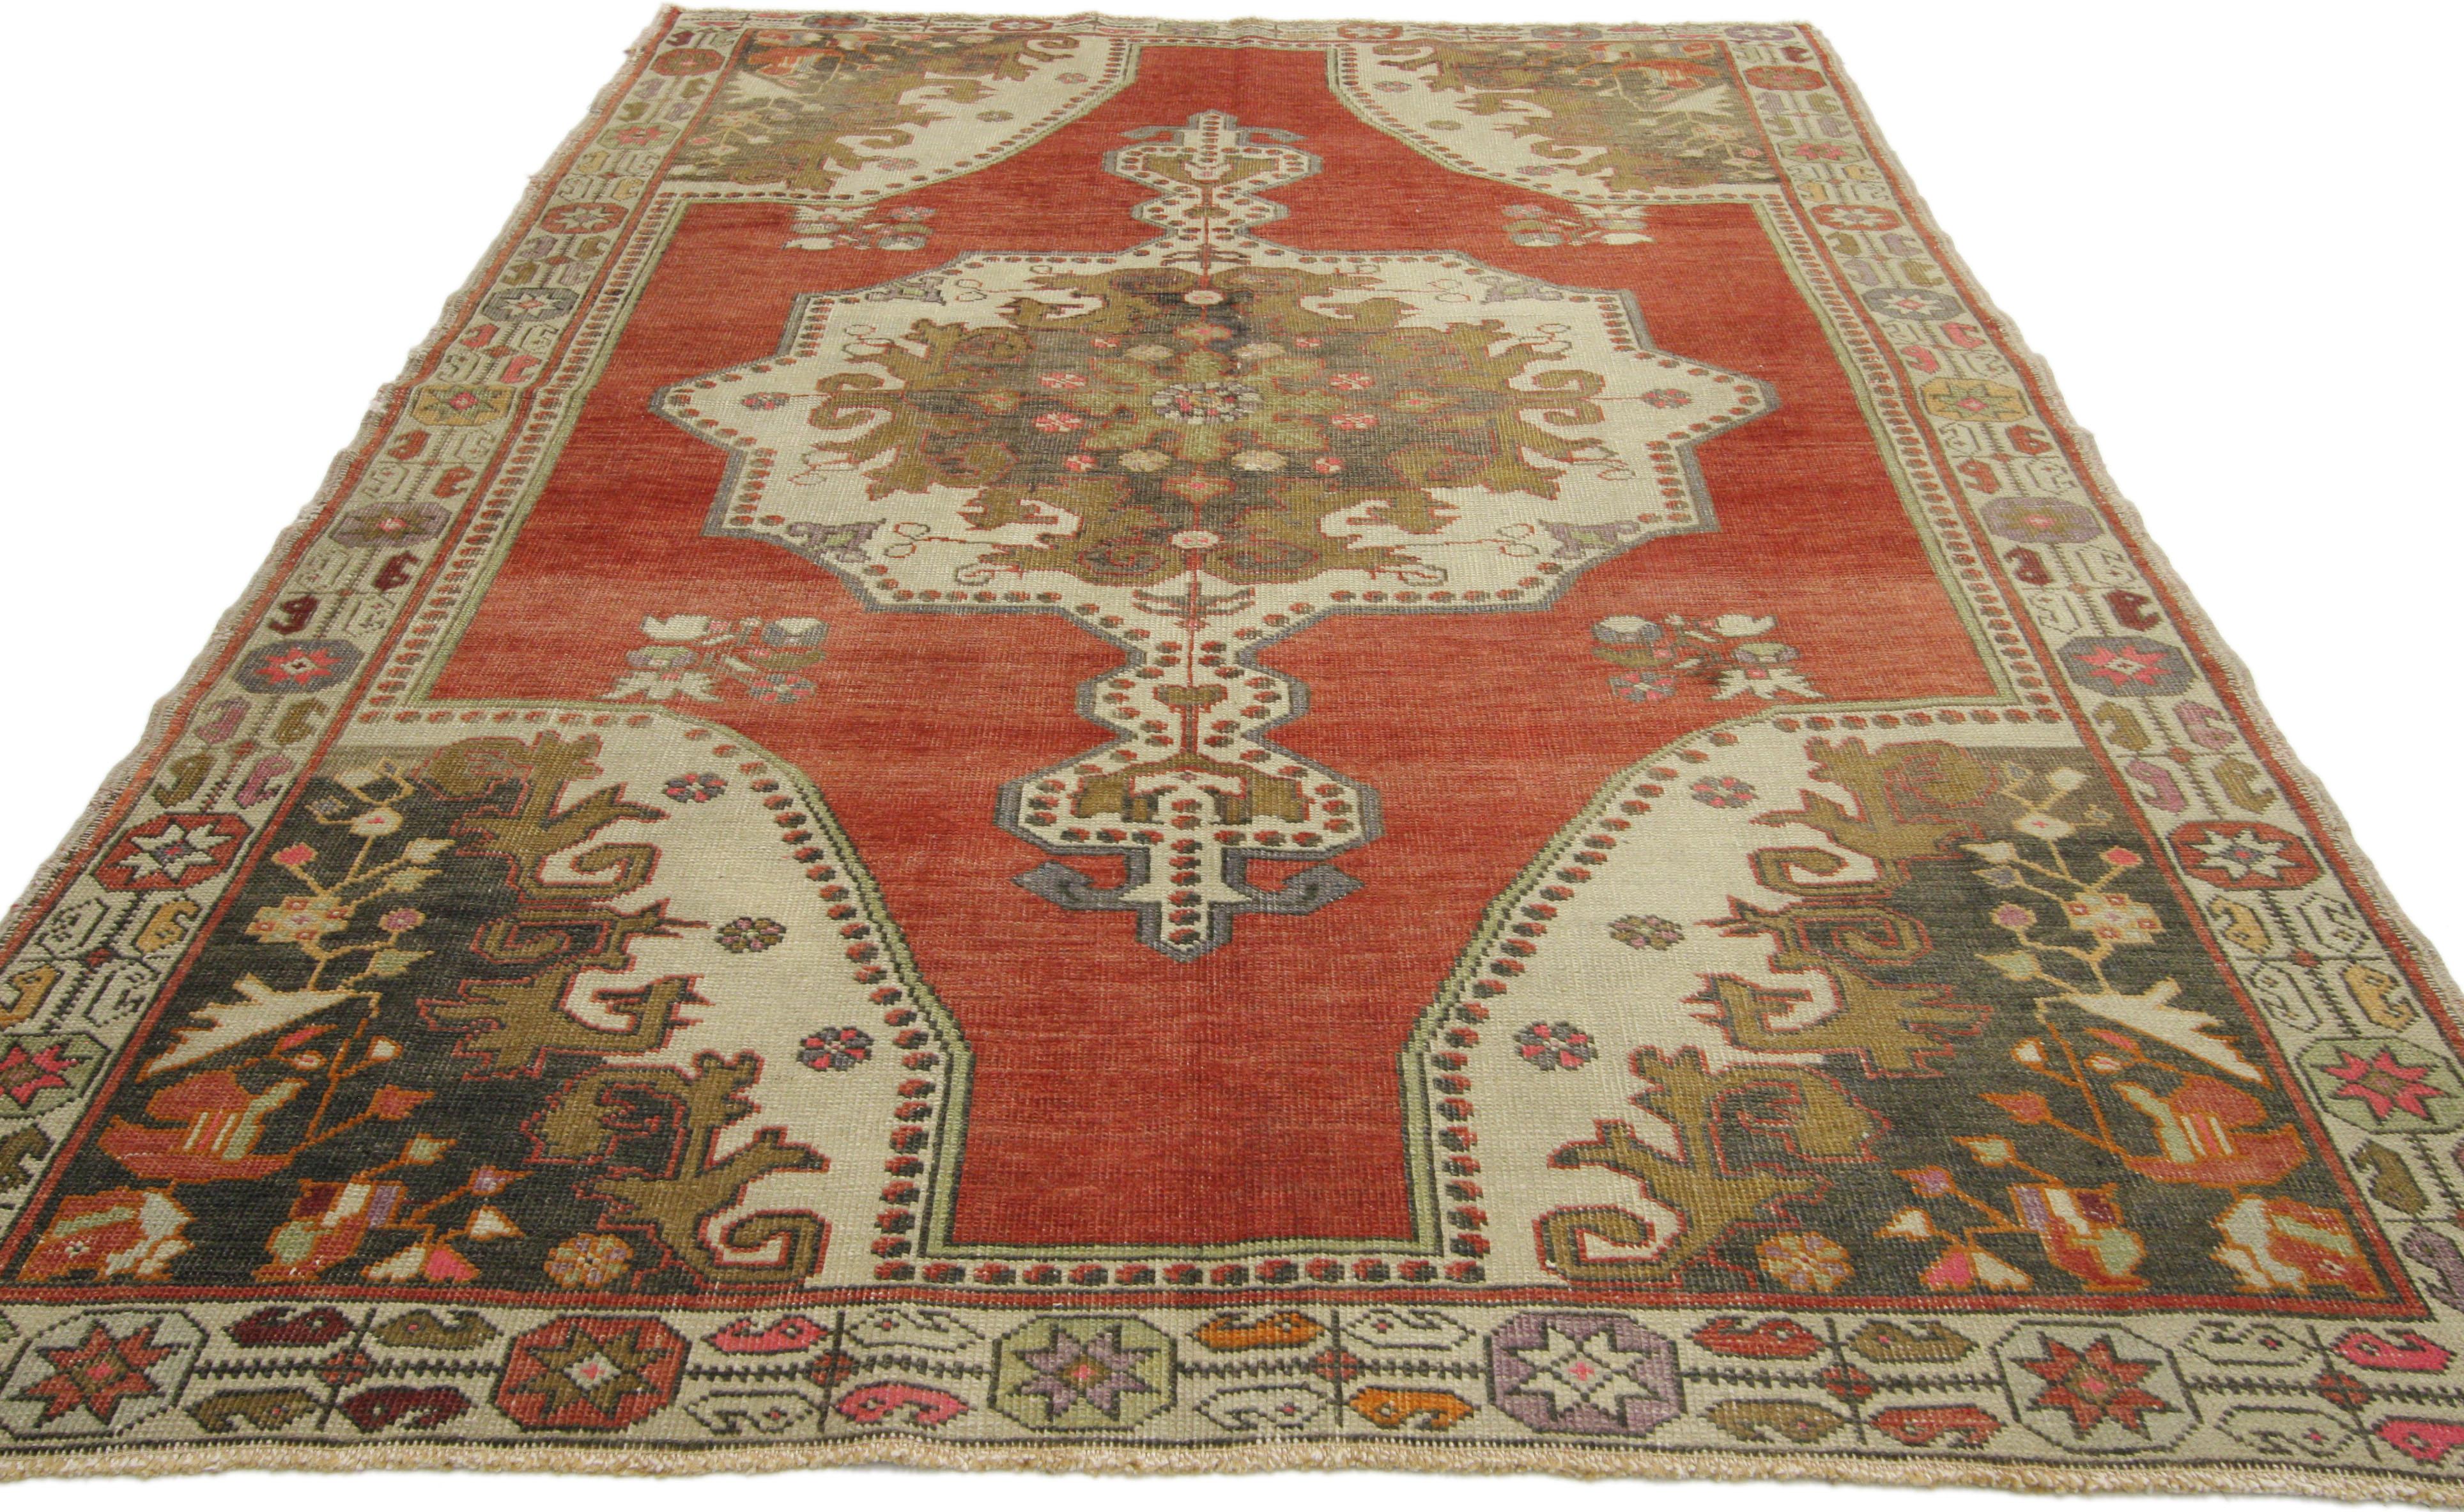 Vintage Turkish Oushak Accent Rug with Rustic Tudor Style In Good Condition For Sale In Dallas, TX